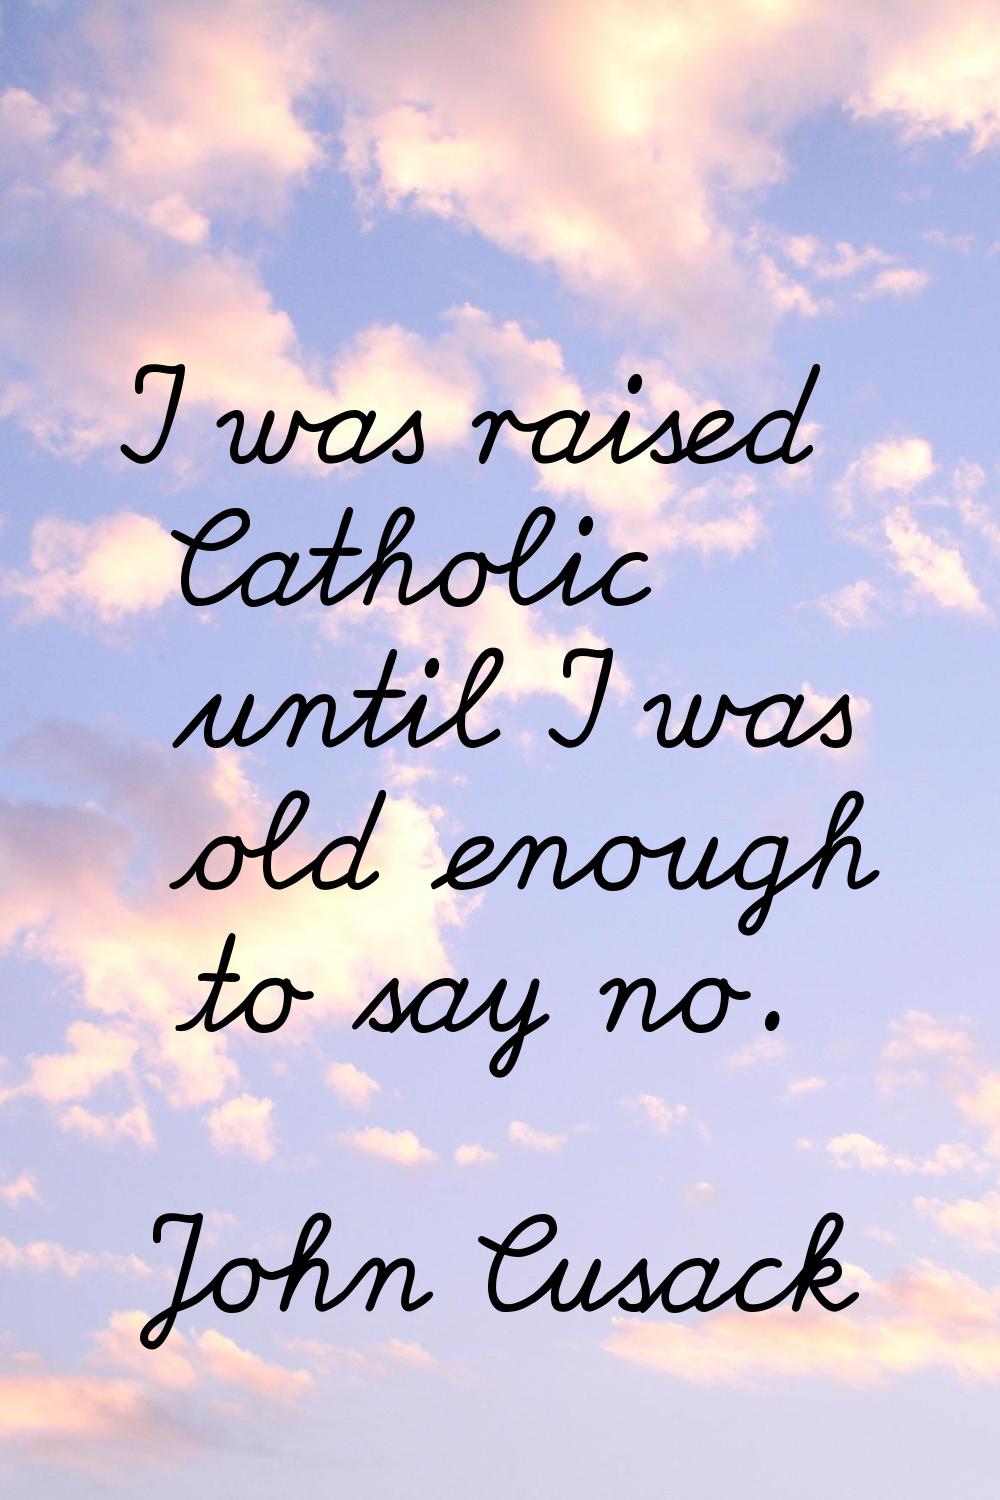 I was raised Catholic until I was old enough to say no.